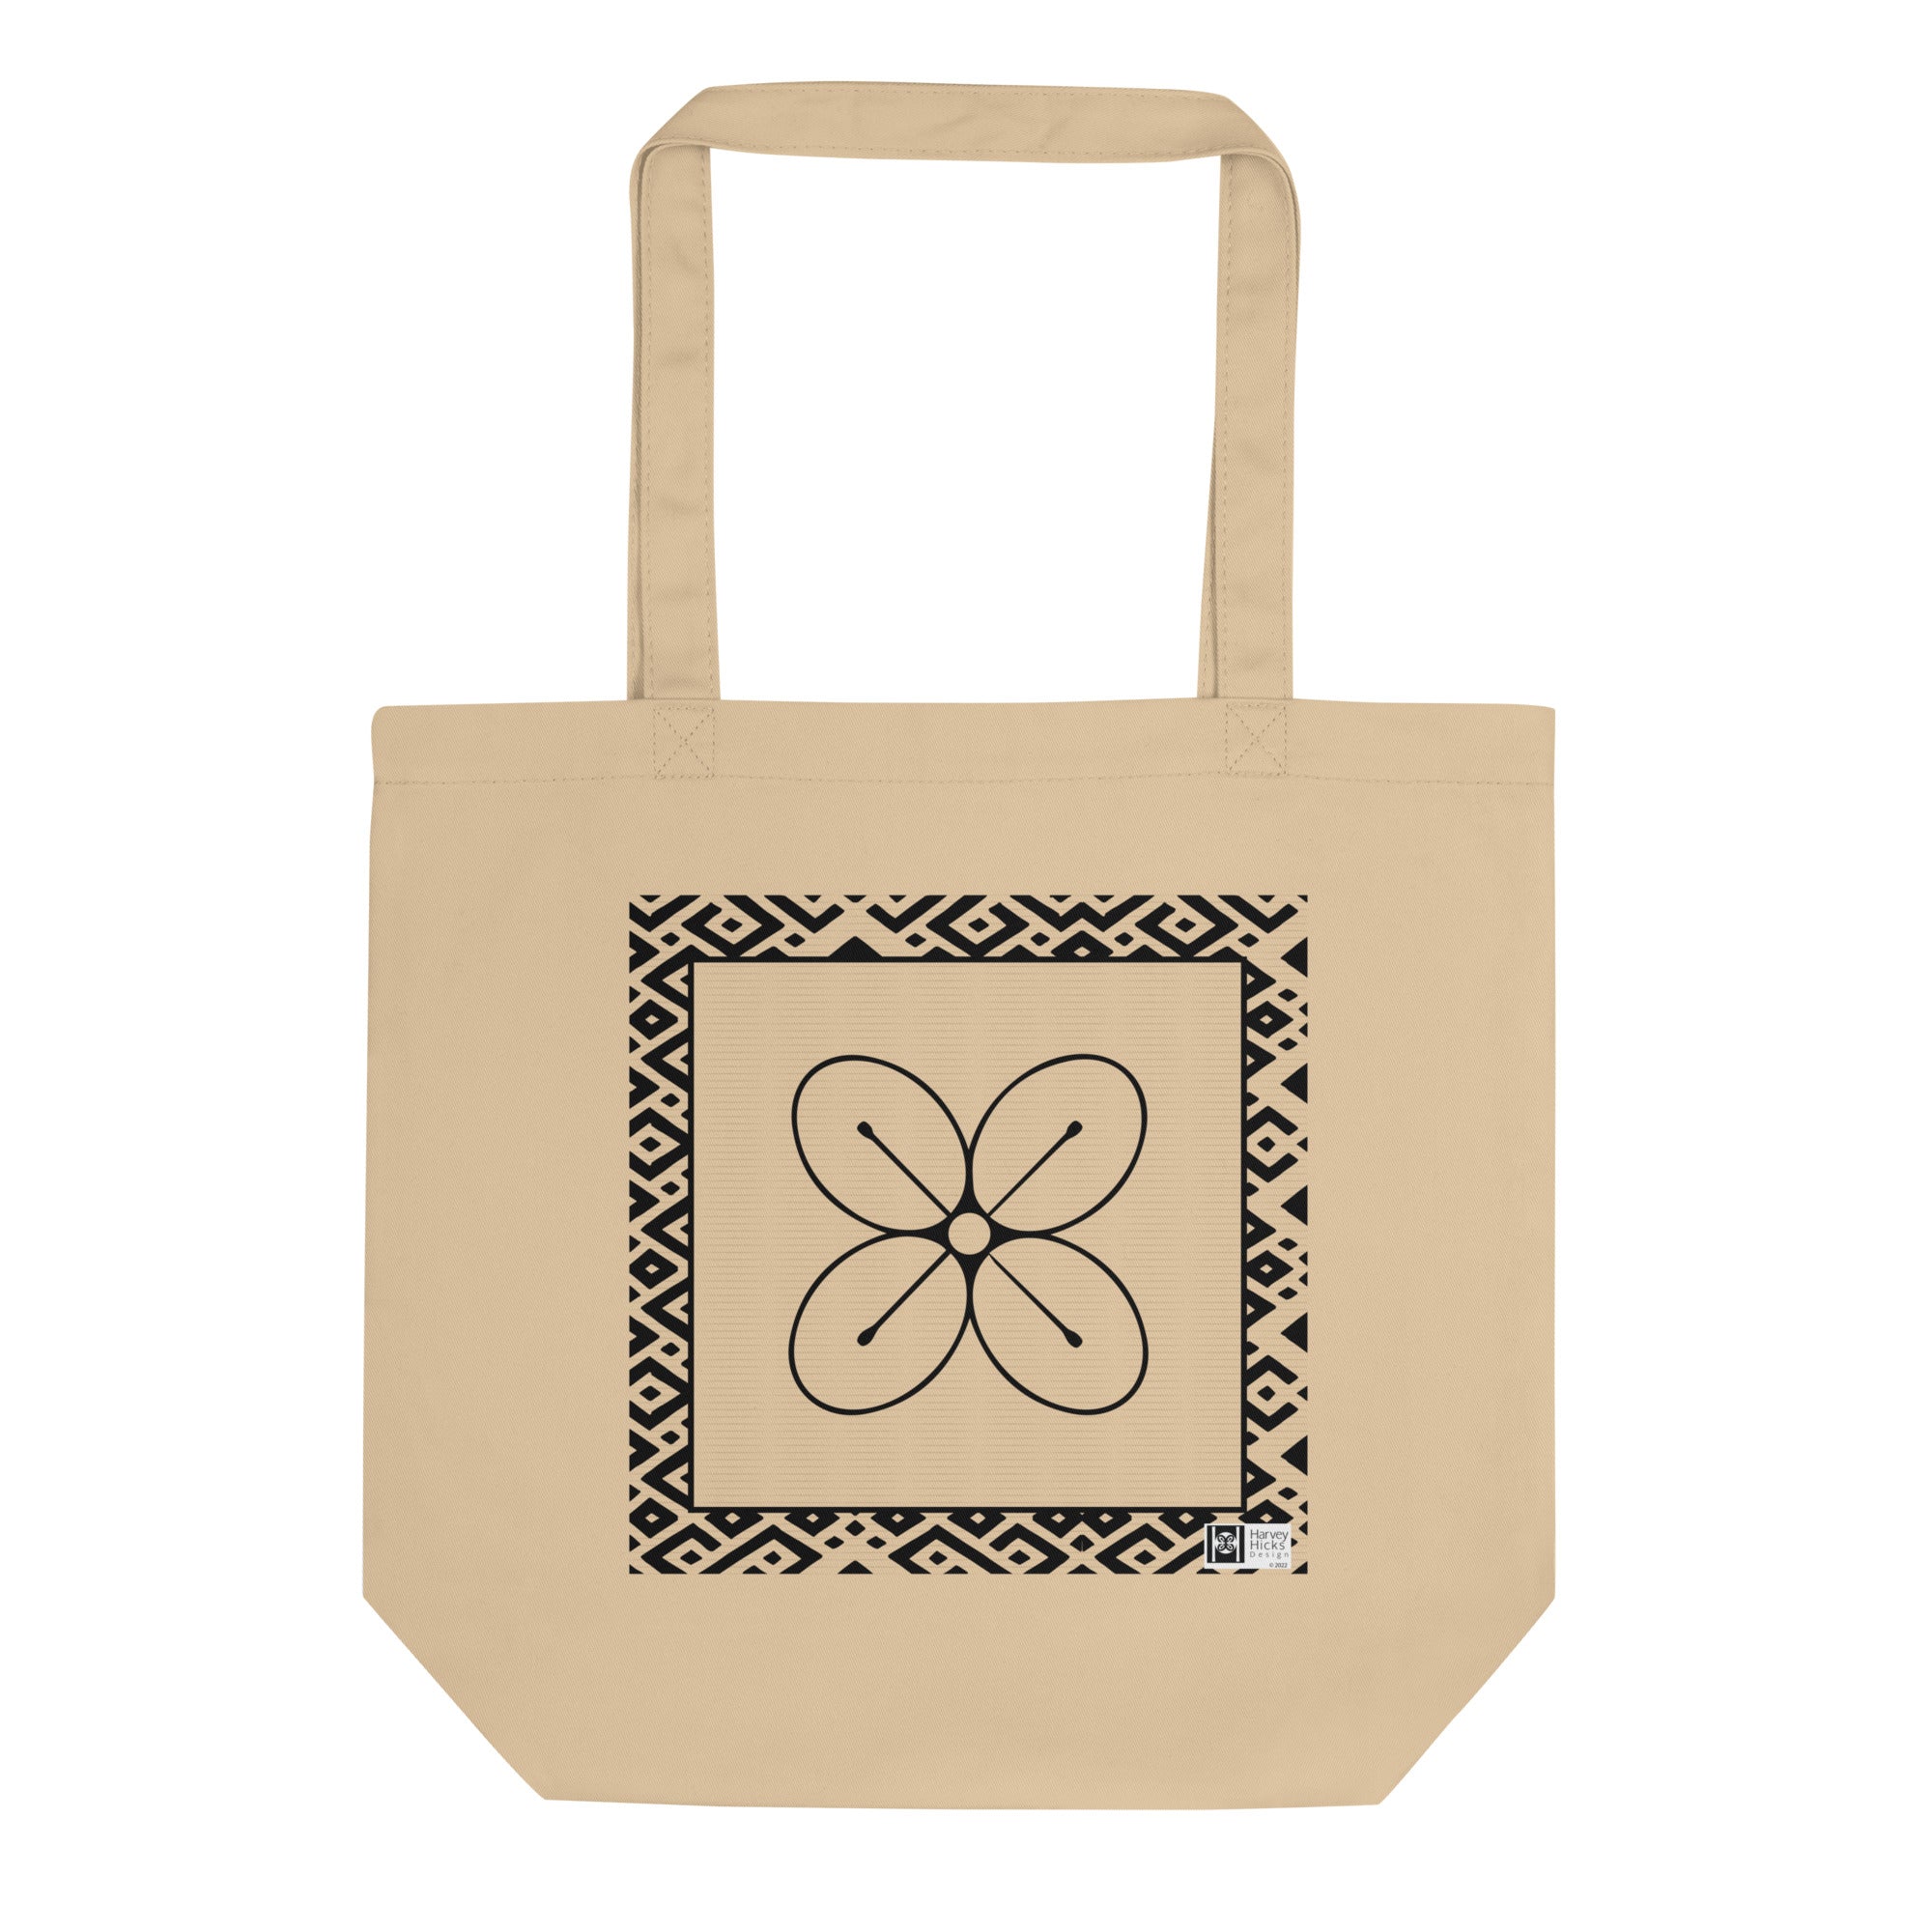 100% cotton Eco Tote Bag, featuring the Adinkra symbol for affluence, NO TEXT